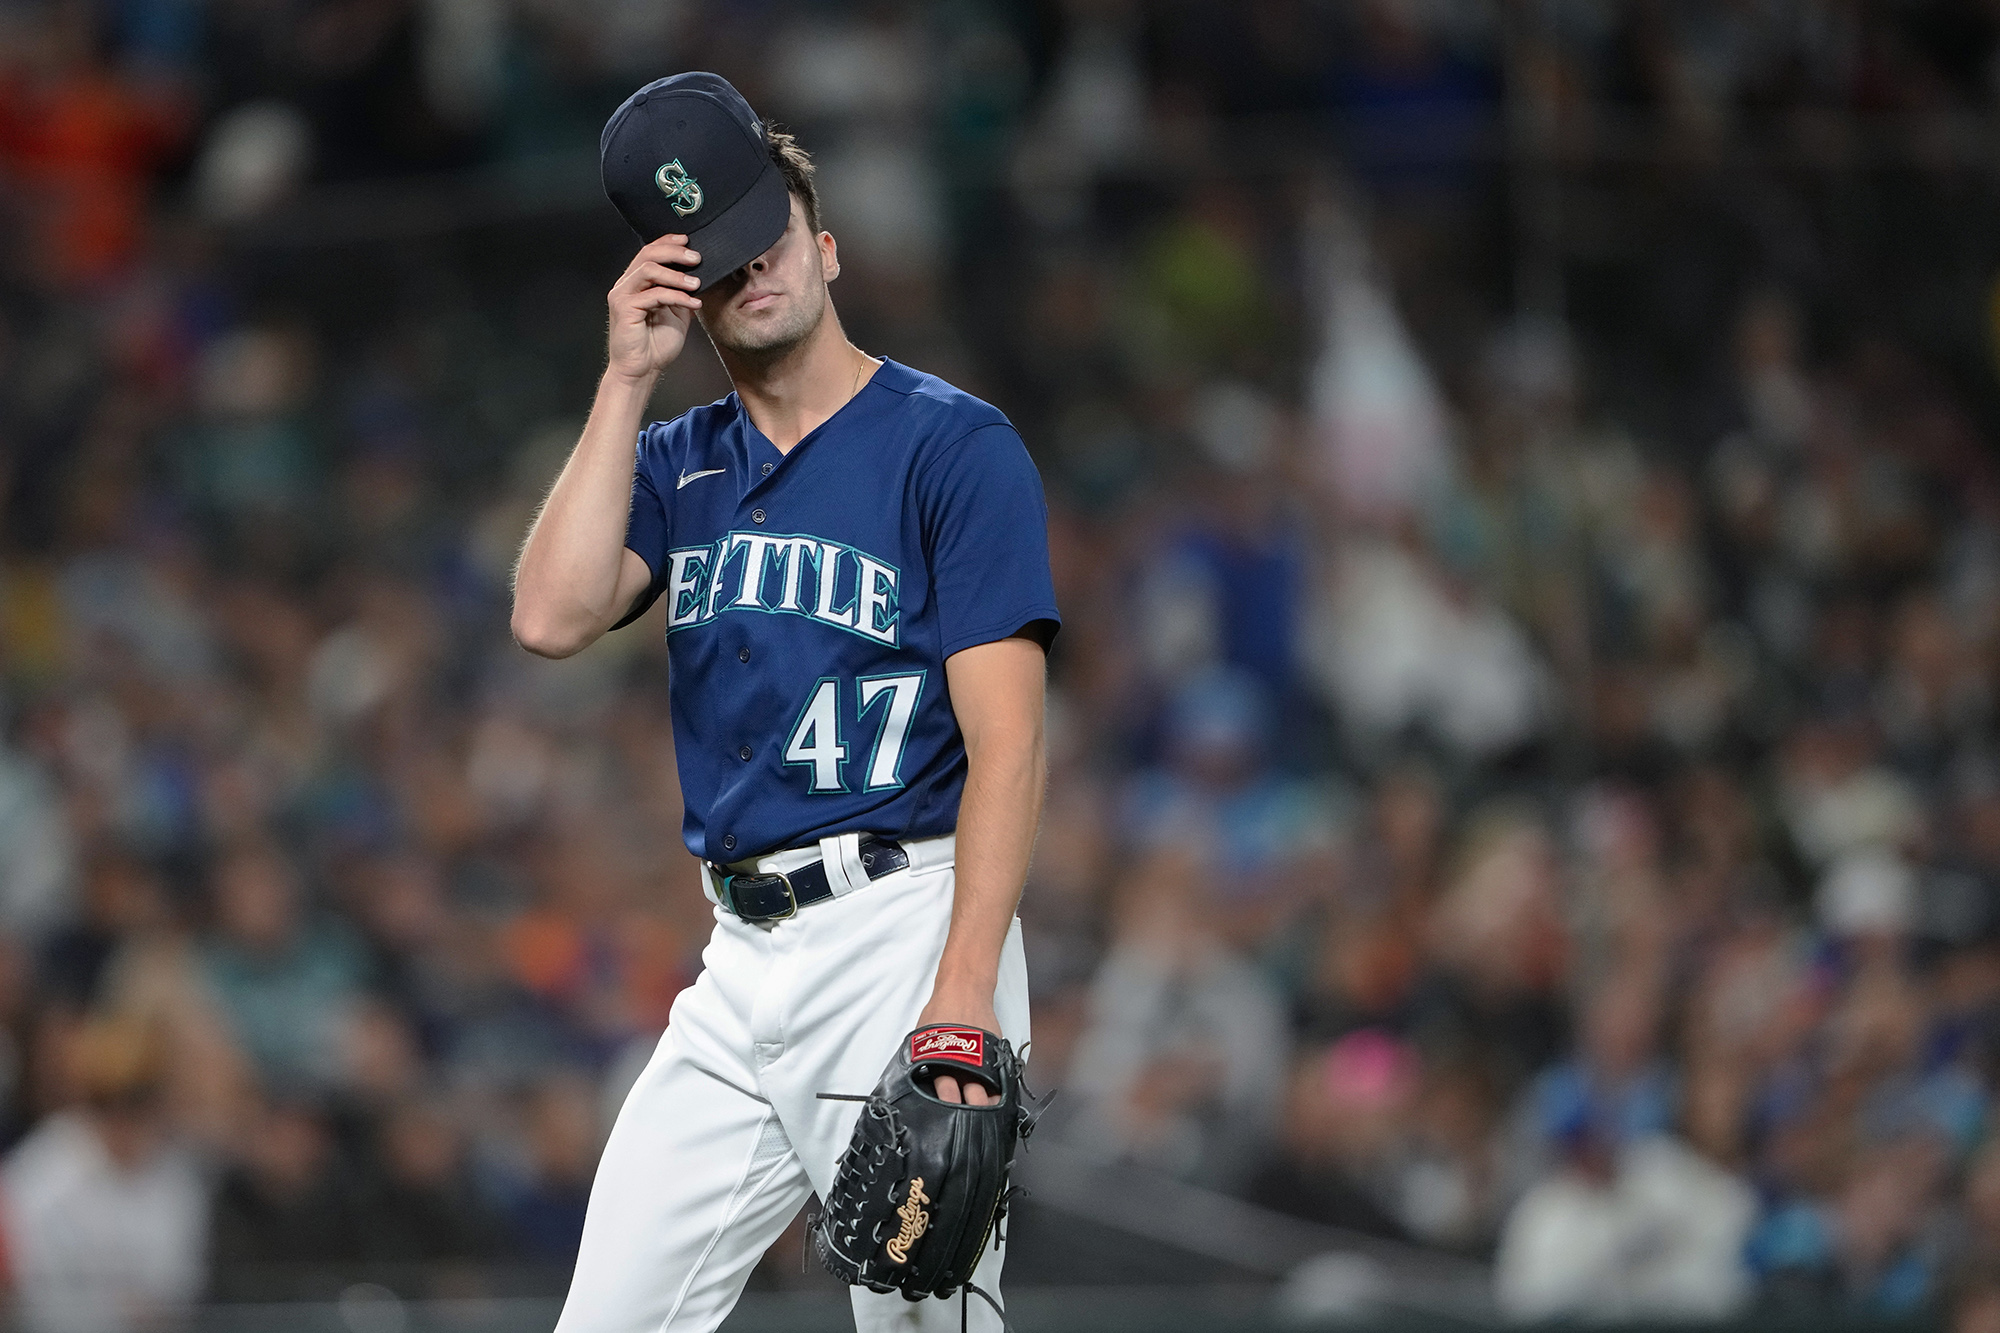 Seattle Mariners relief pitcher Matt Brash walks off the field after pitching to the Houston Astros during the seventh inning of a baseball game Wednesday, Sept. 27, 2023, in Seattle.